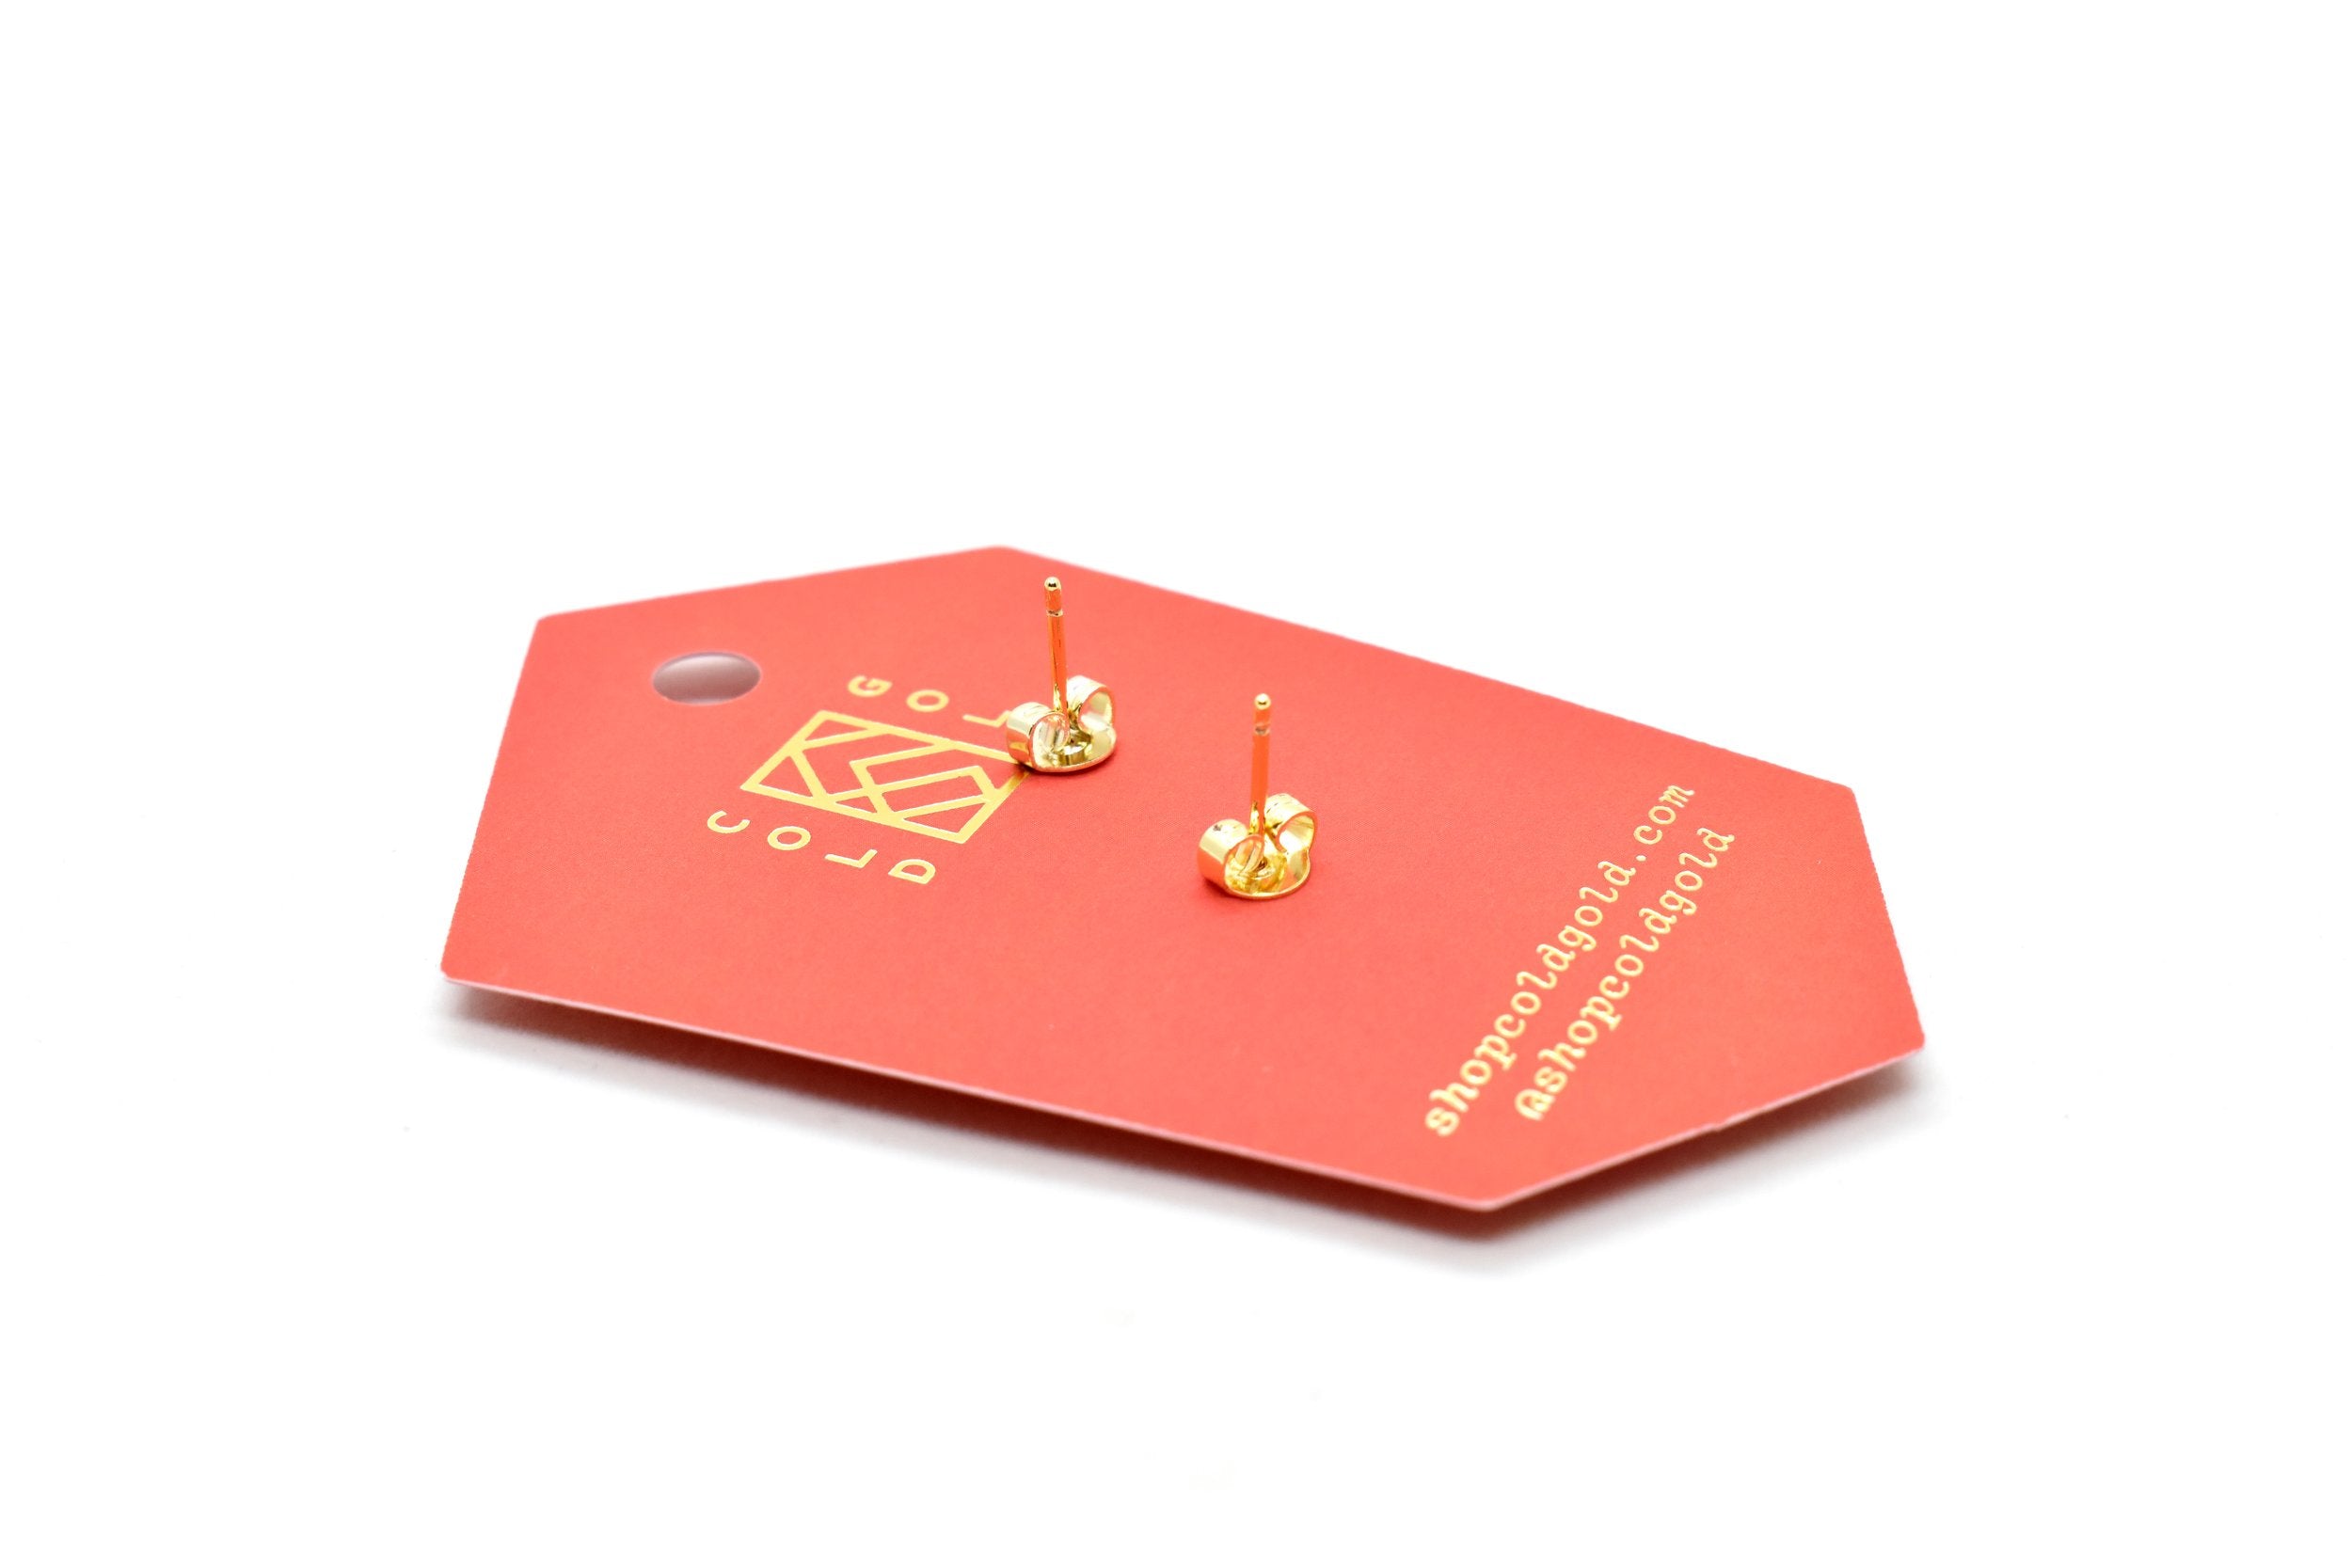 back of the card holding gold half moon stud earring set in ruby red clay with sterling silver posts that are good for sensitive ears